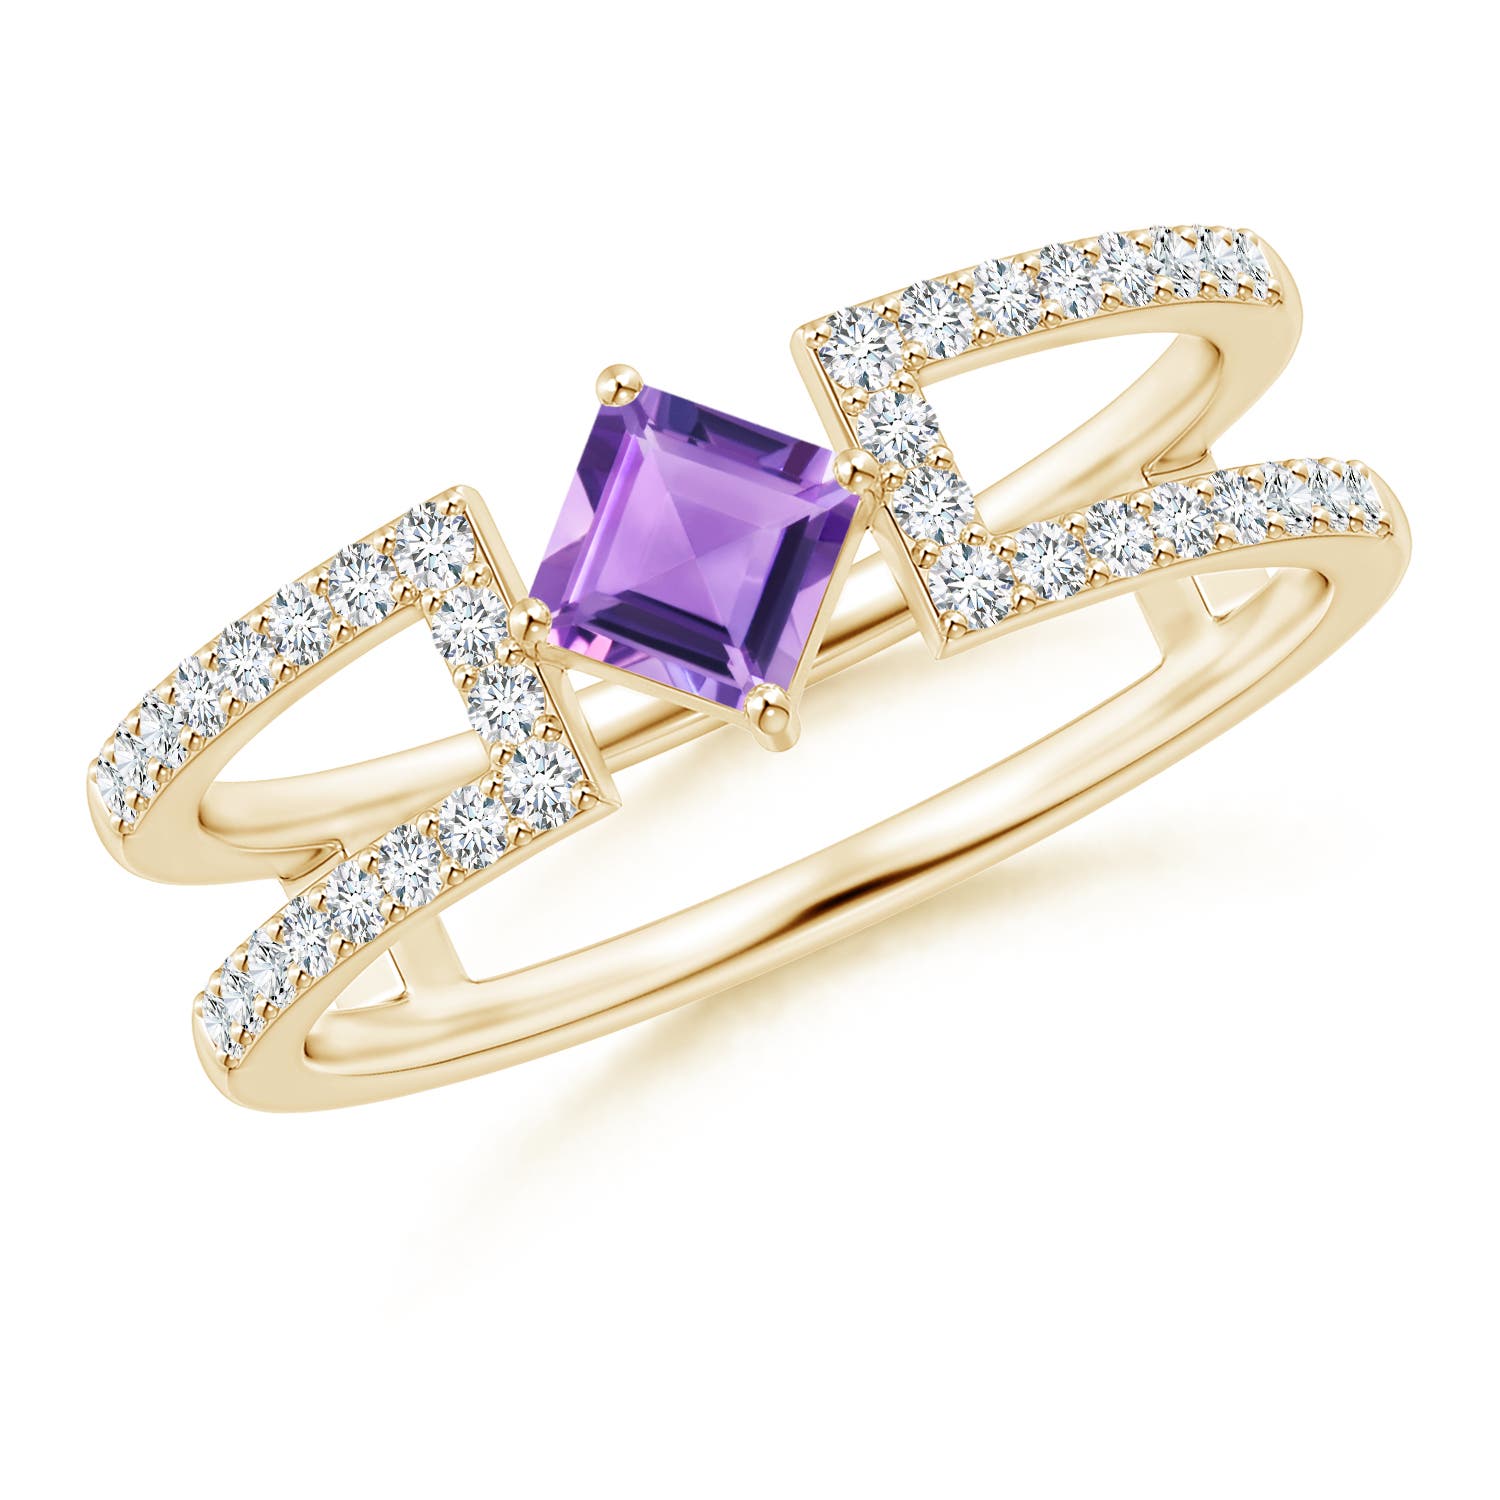 A - Amethyst / 0.58 CT / 14 KT Yellow Gold